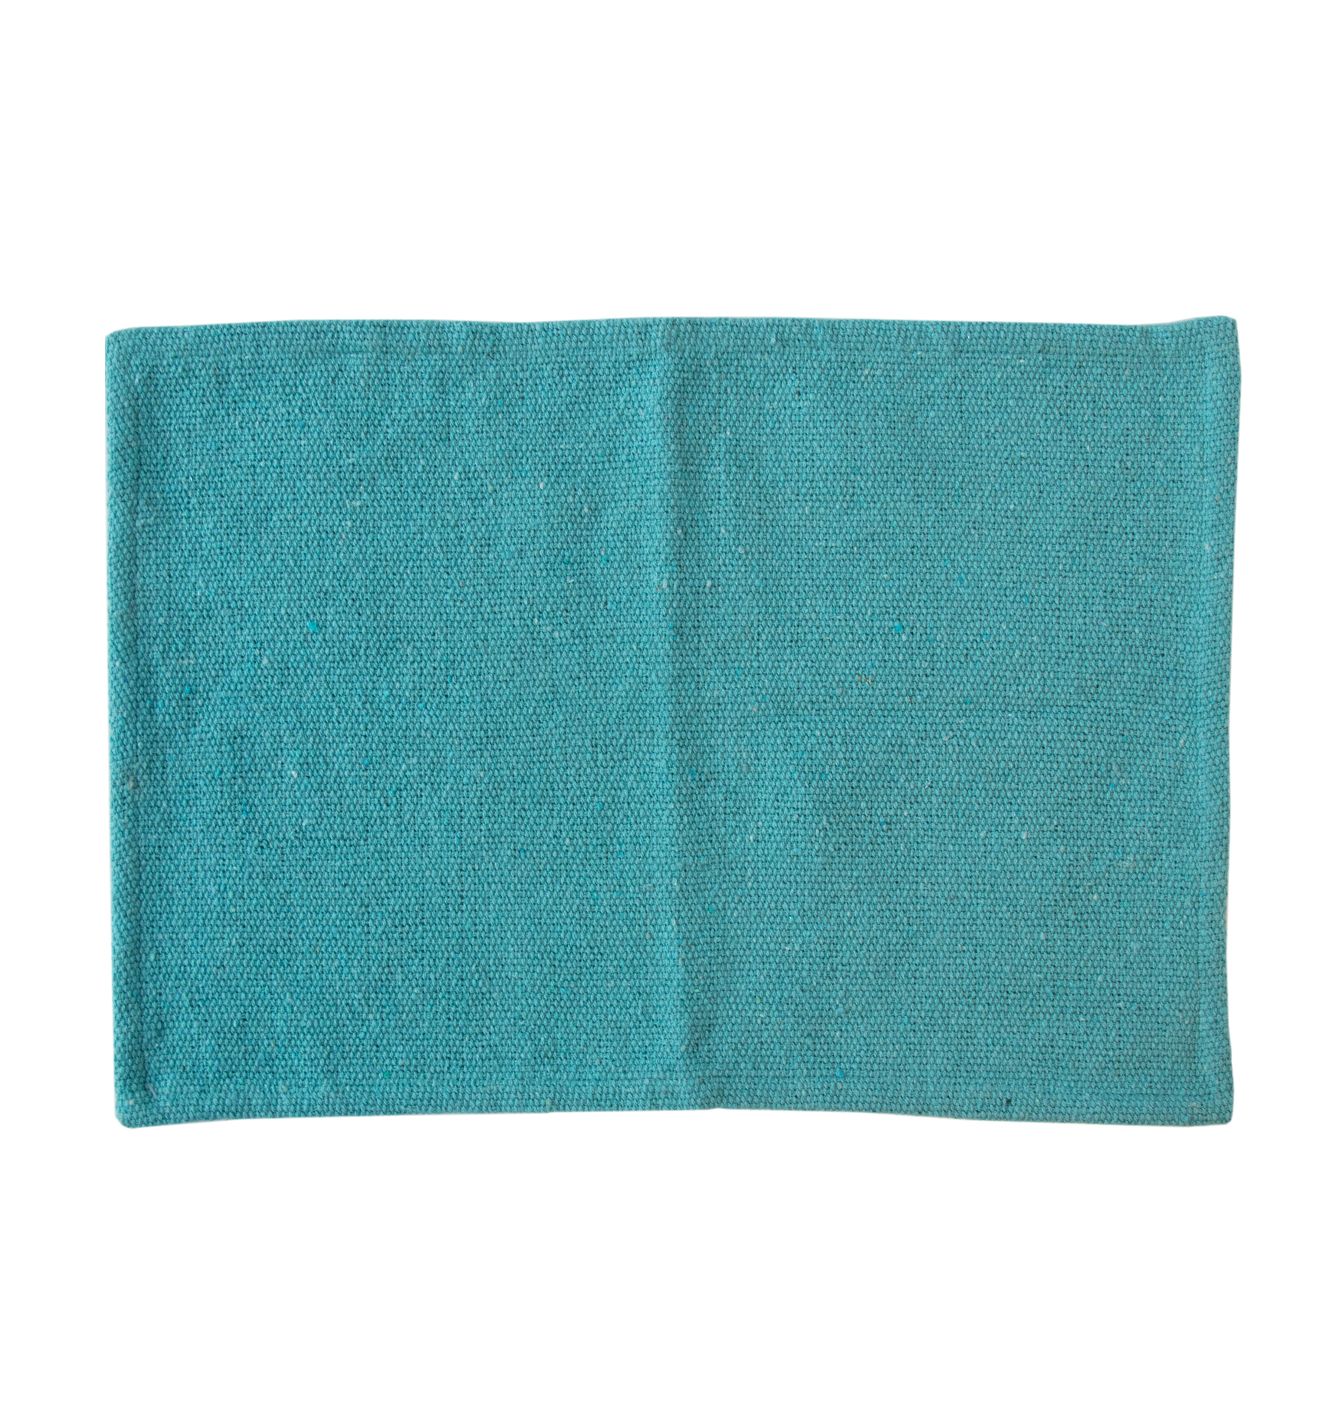 Unc Placemat Recycled Cotton Canal Blue Gift